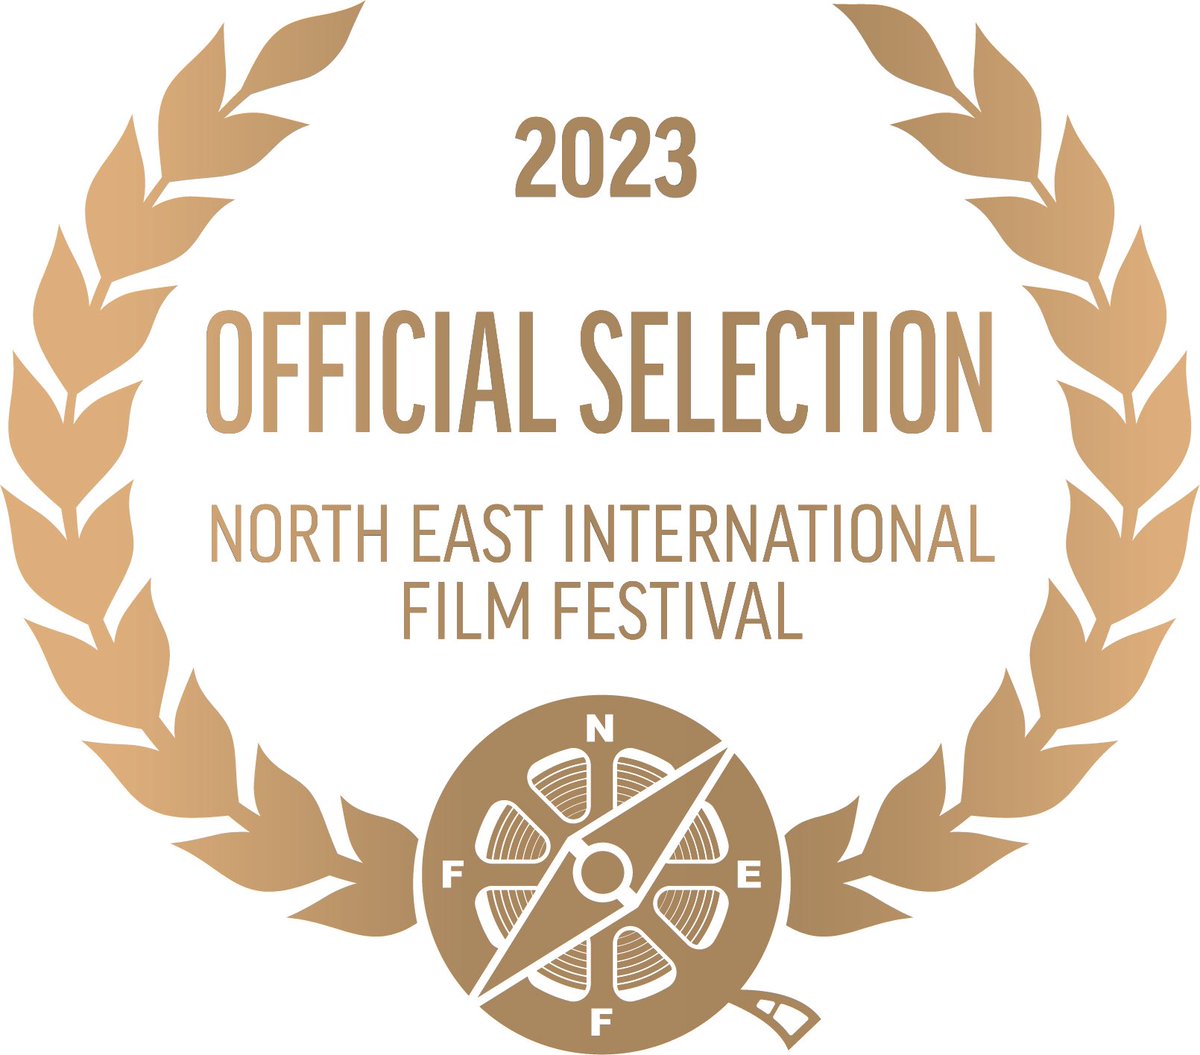 Toot toot 🚂 we’re delighted that our #shortfilm #DreamBig, supported by @networkfhse will be heading 2 the @BIFA_film & @IMDb qualifying @NEIFF_Official next month! Save the dates 29th September - 1st October #filmfestival #filmfestival2023 #FRated #womeninfilm #femalefilmmakers